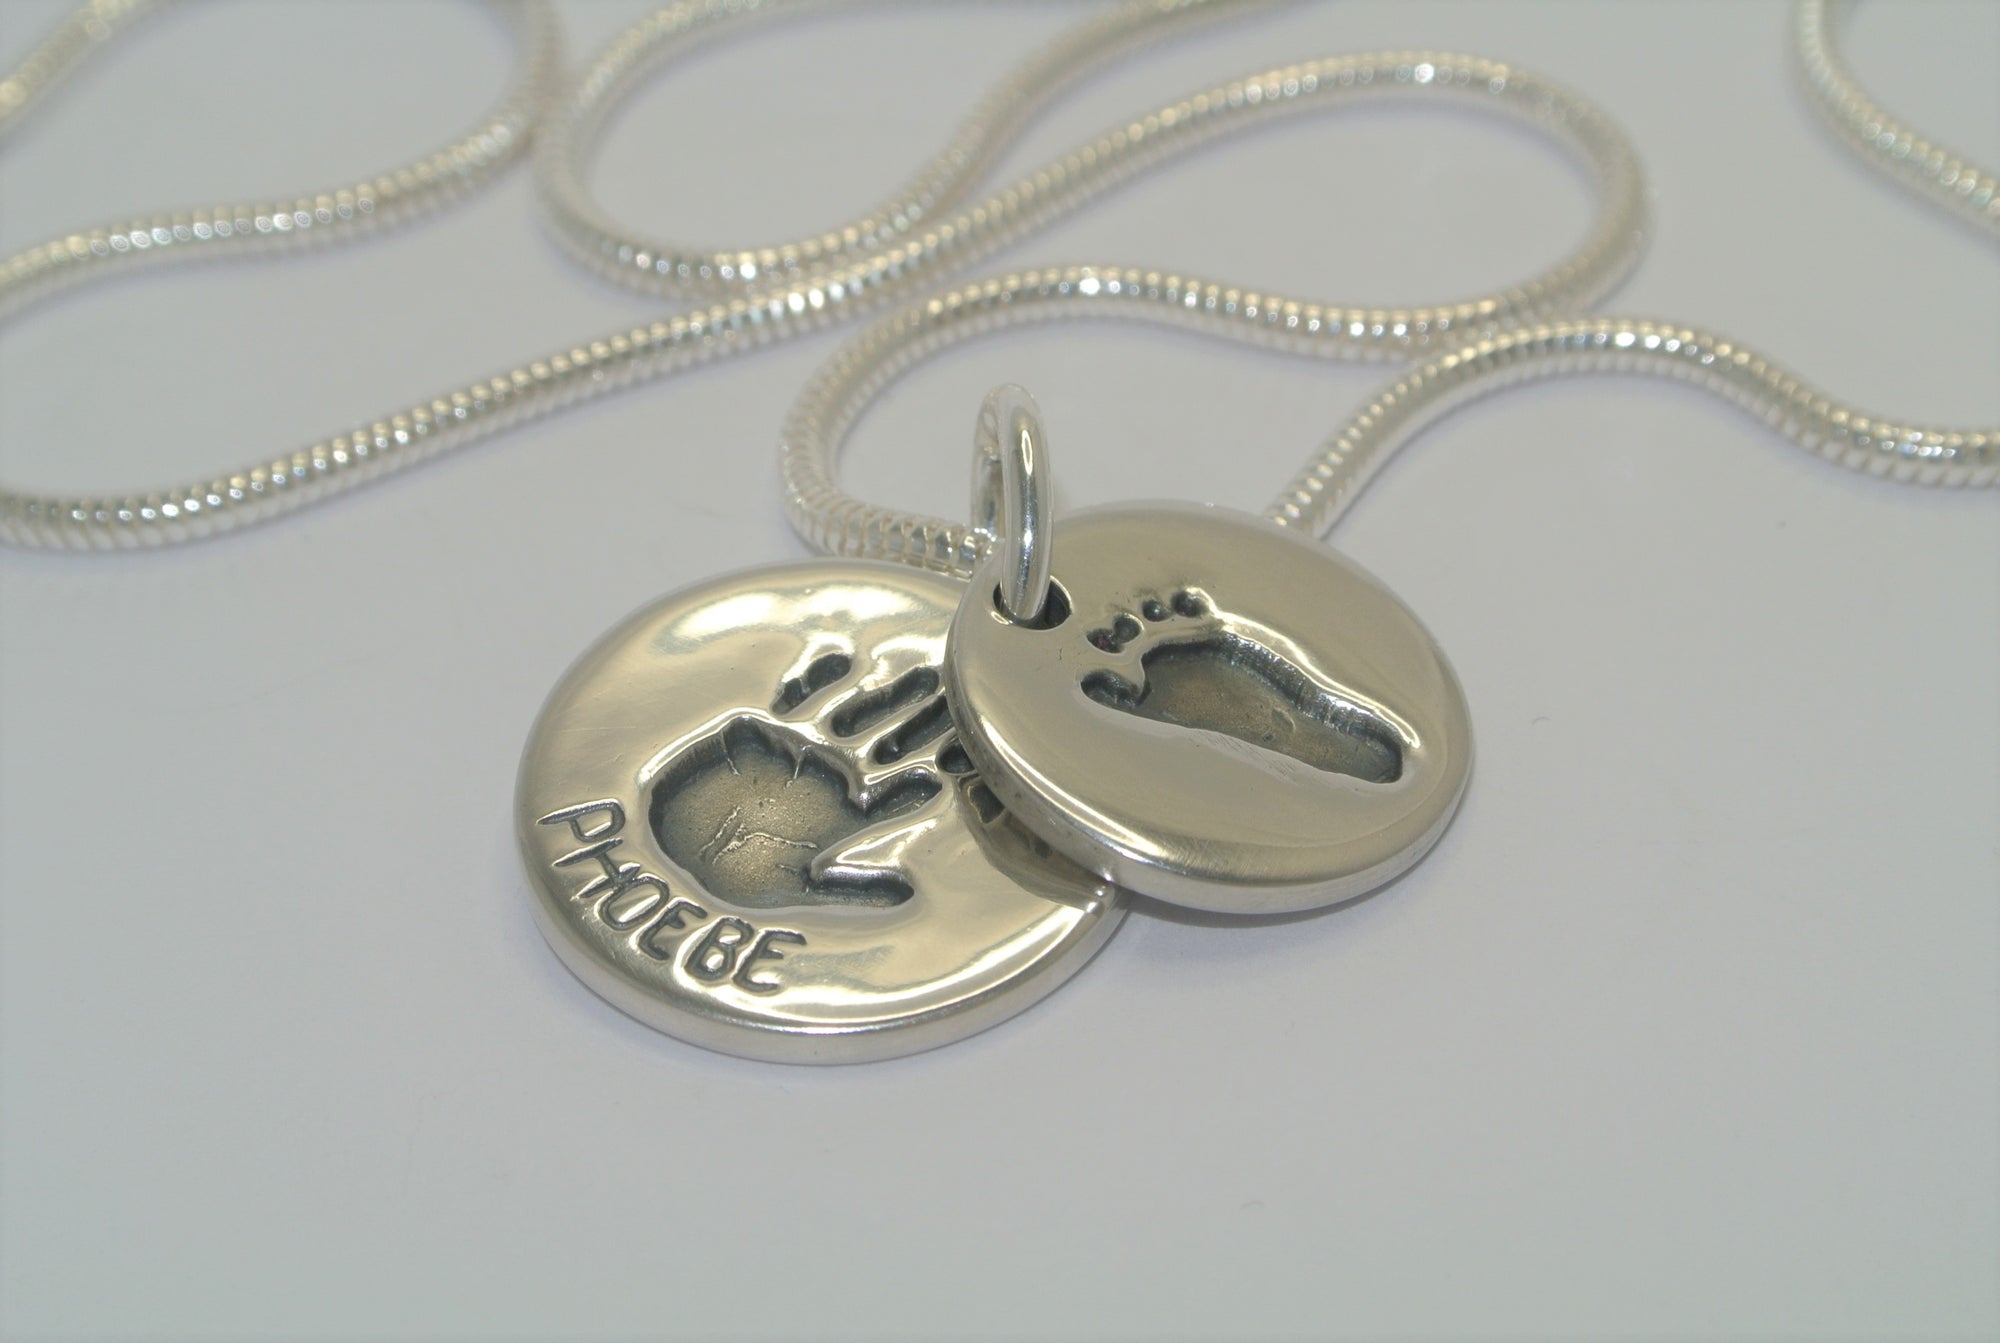 handprint necklace, footprint necklace, baby handprint, child handprint, hand print necklace, personalised necklace, silver handprint jewellery, from the heart jewellery, baby footprint, footprint necklace, child footprint, handprint double necklace